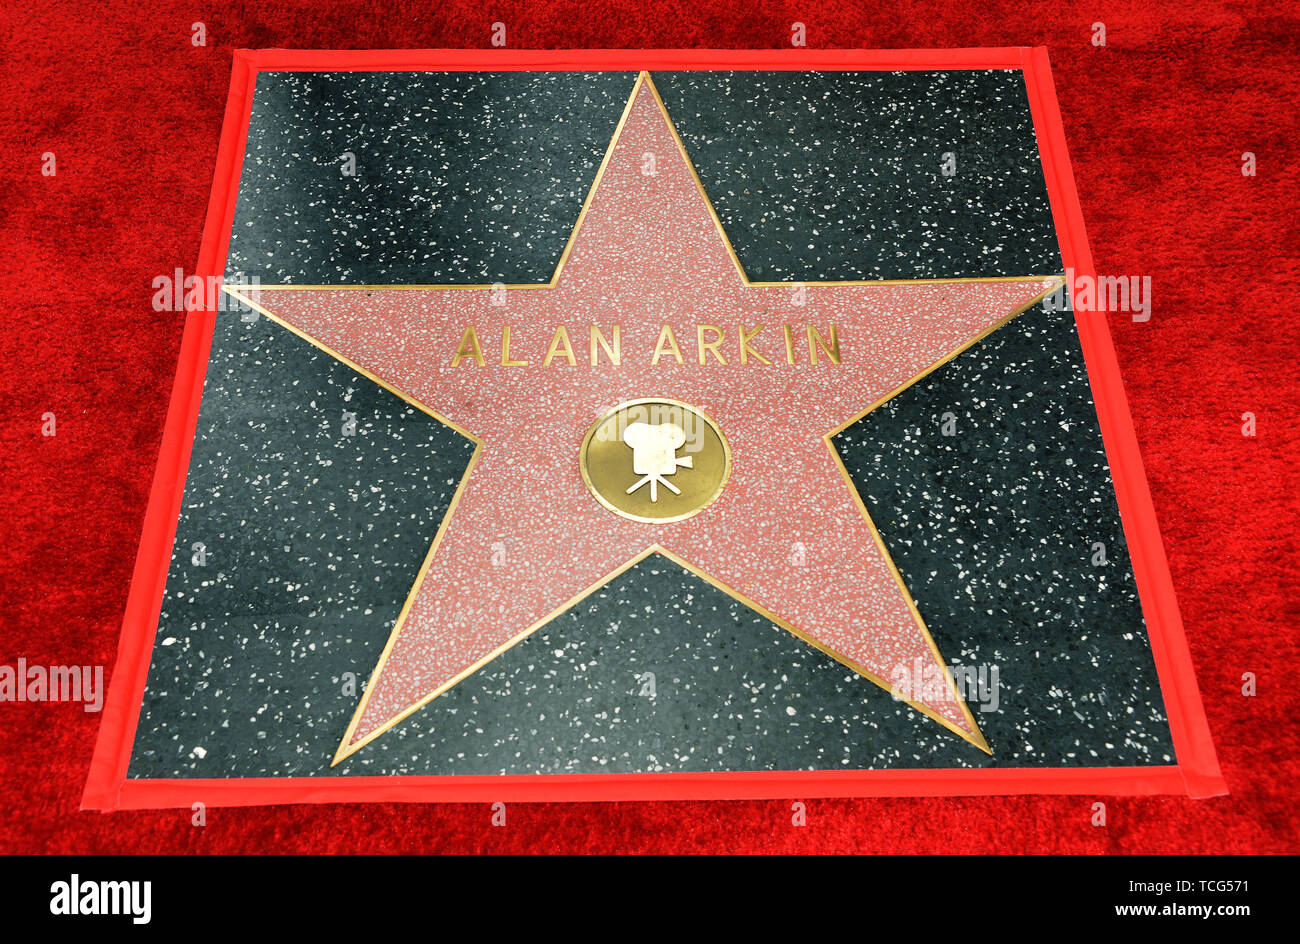 Los Angeles, USA. 07th June, 2019. Alan Arkin star 038 Alan Arkin is honored with a star on The Hollywood Walk of Fame on June 07, 2019 in Hollywood, California. Credit: Tsuni/USA/Alamy Live News Stock Photo